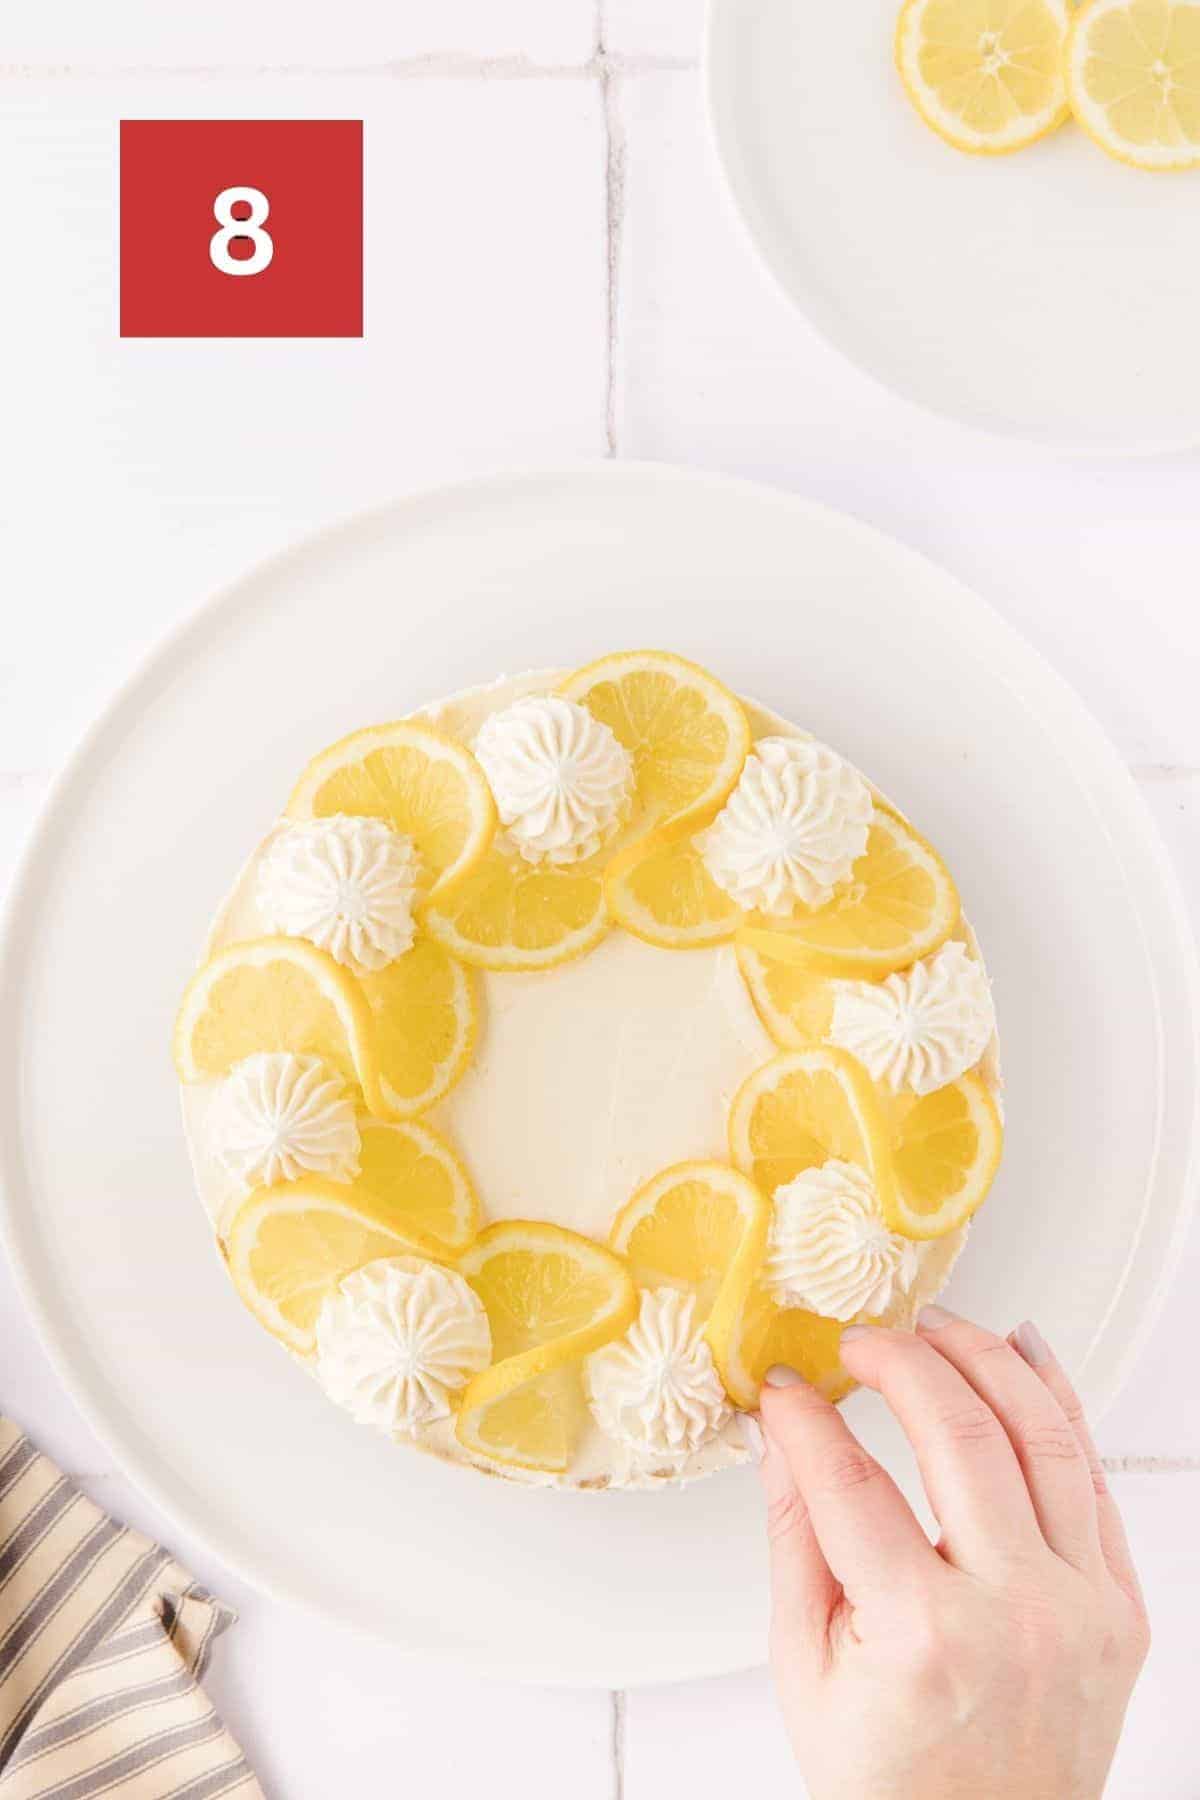 A hand placing lemon slices on top of the no bake lemon cheesecake. In the upper left corner is a dark red square with a white '8' in the center.